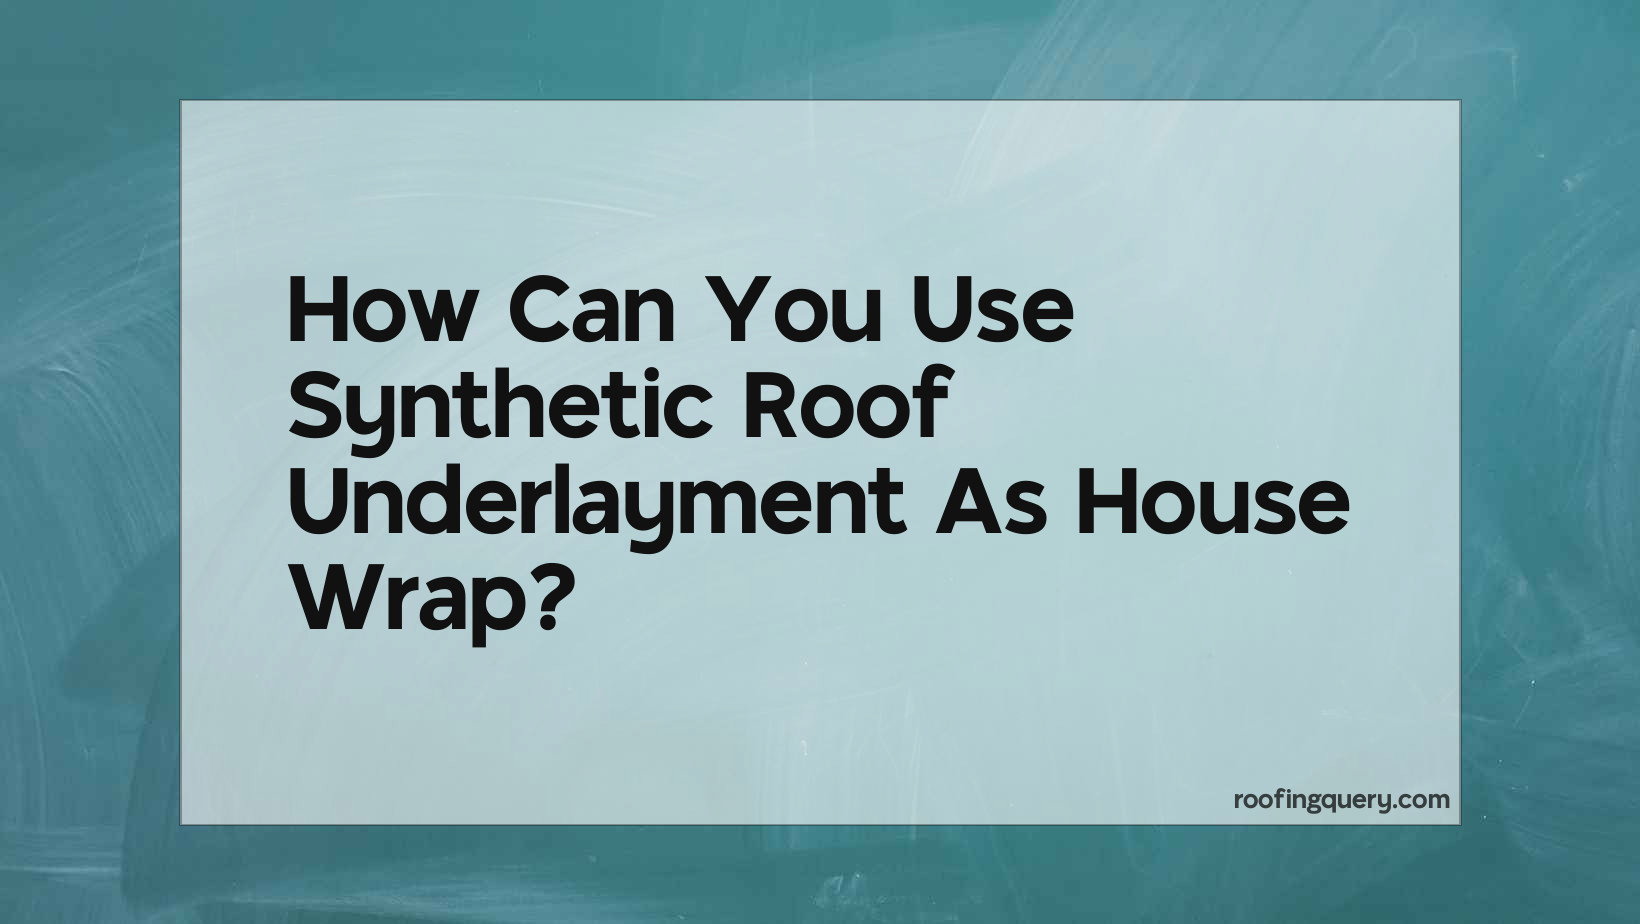 How Can You Use Synthetic Roof Underlayment As House Wrap?